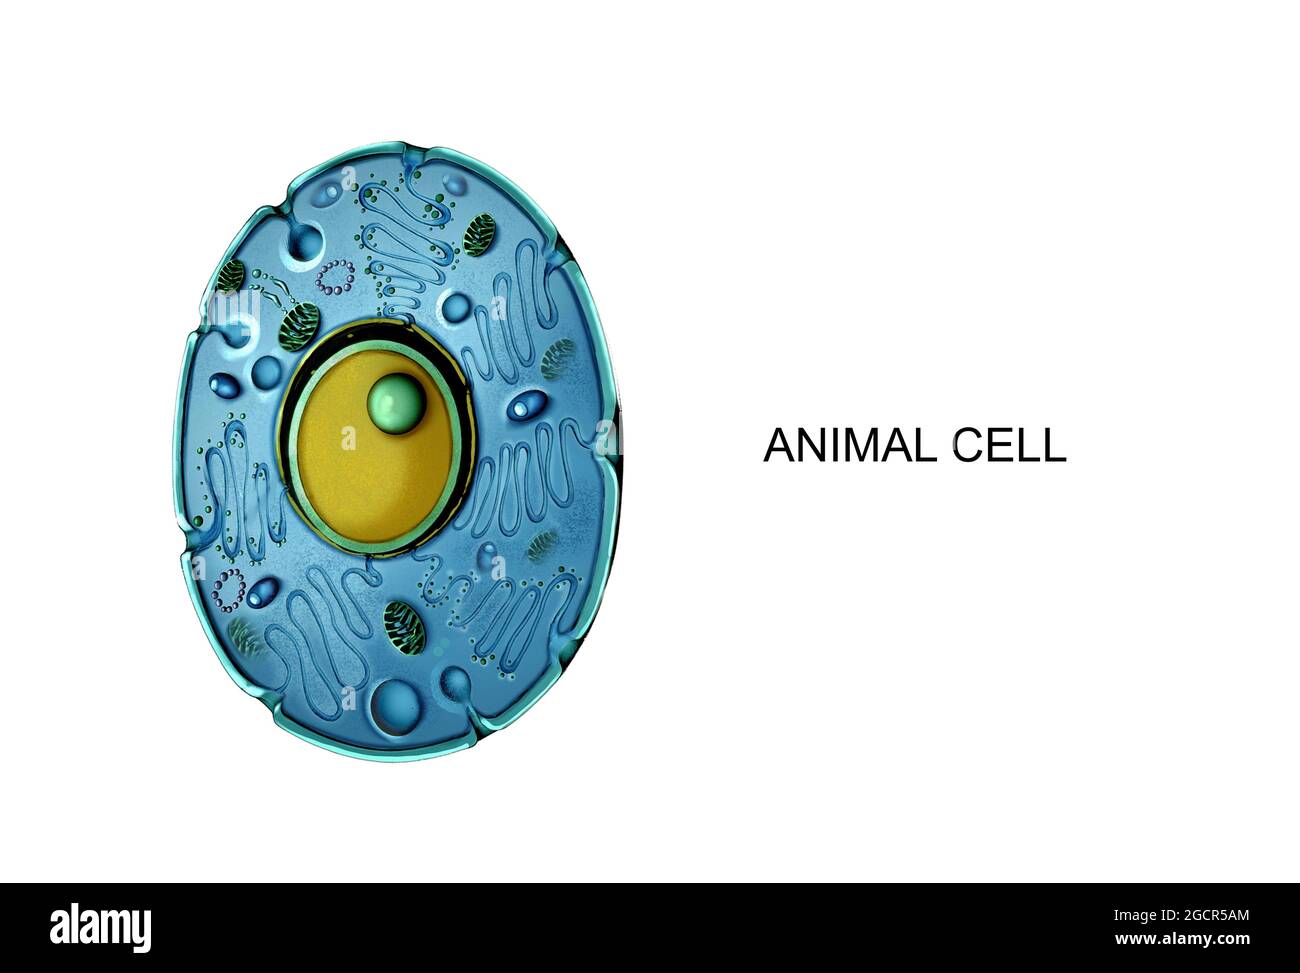 Illustration of the animal cell Stock Photo